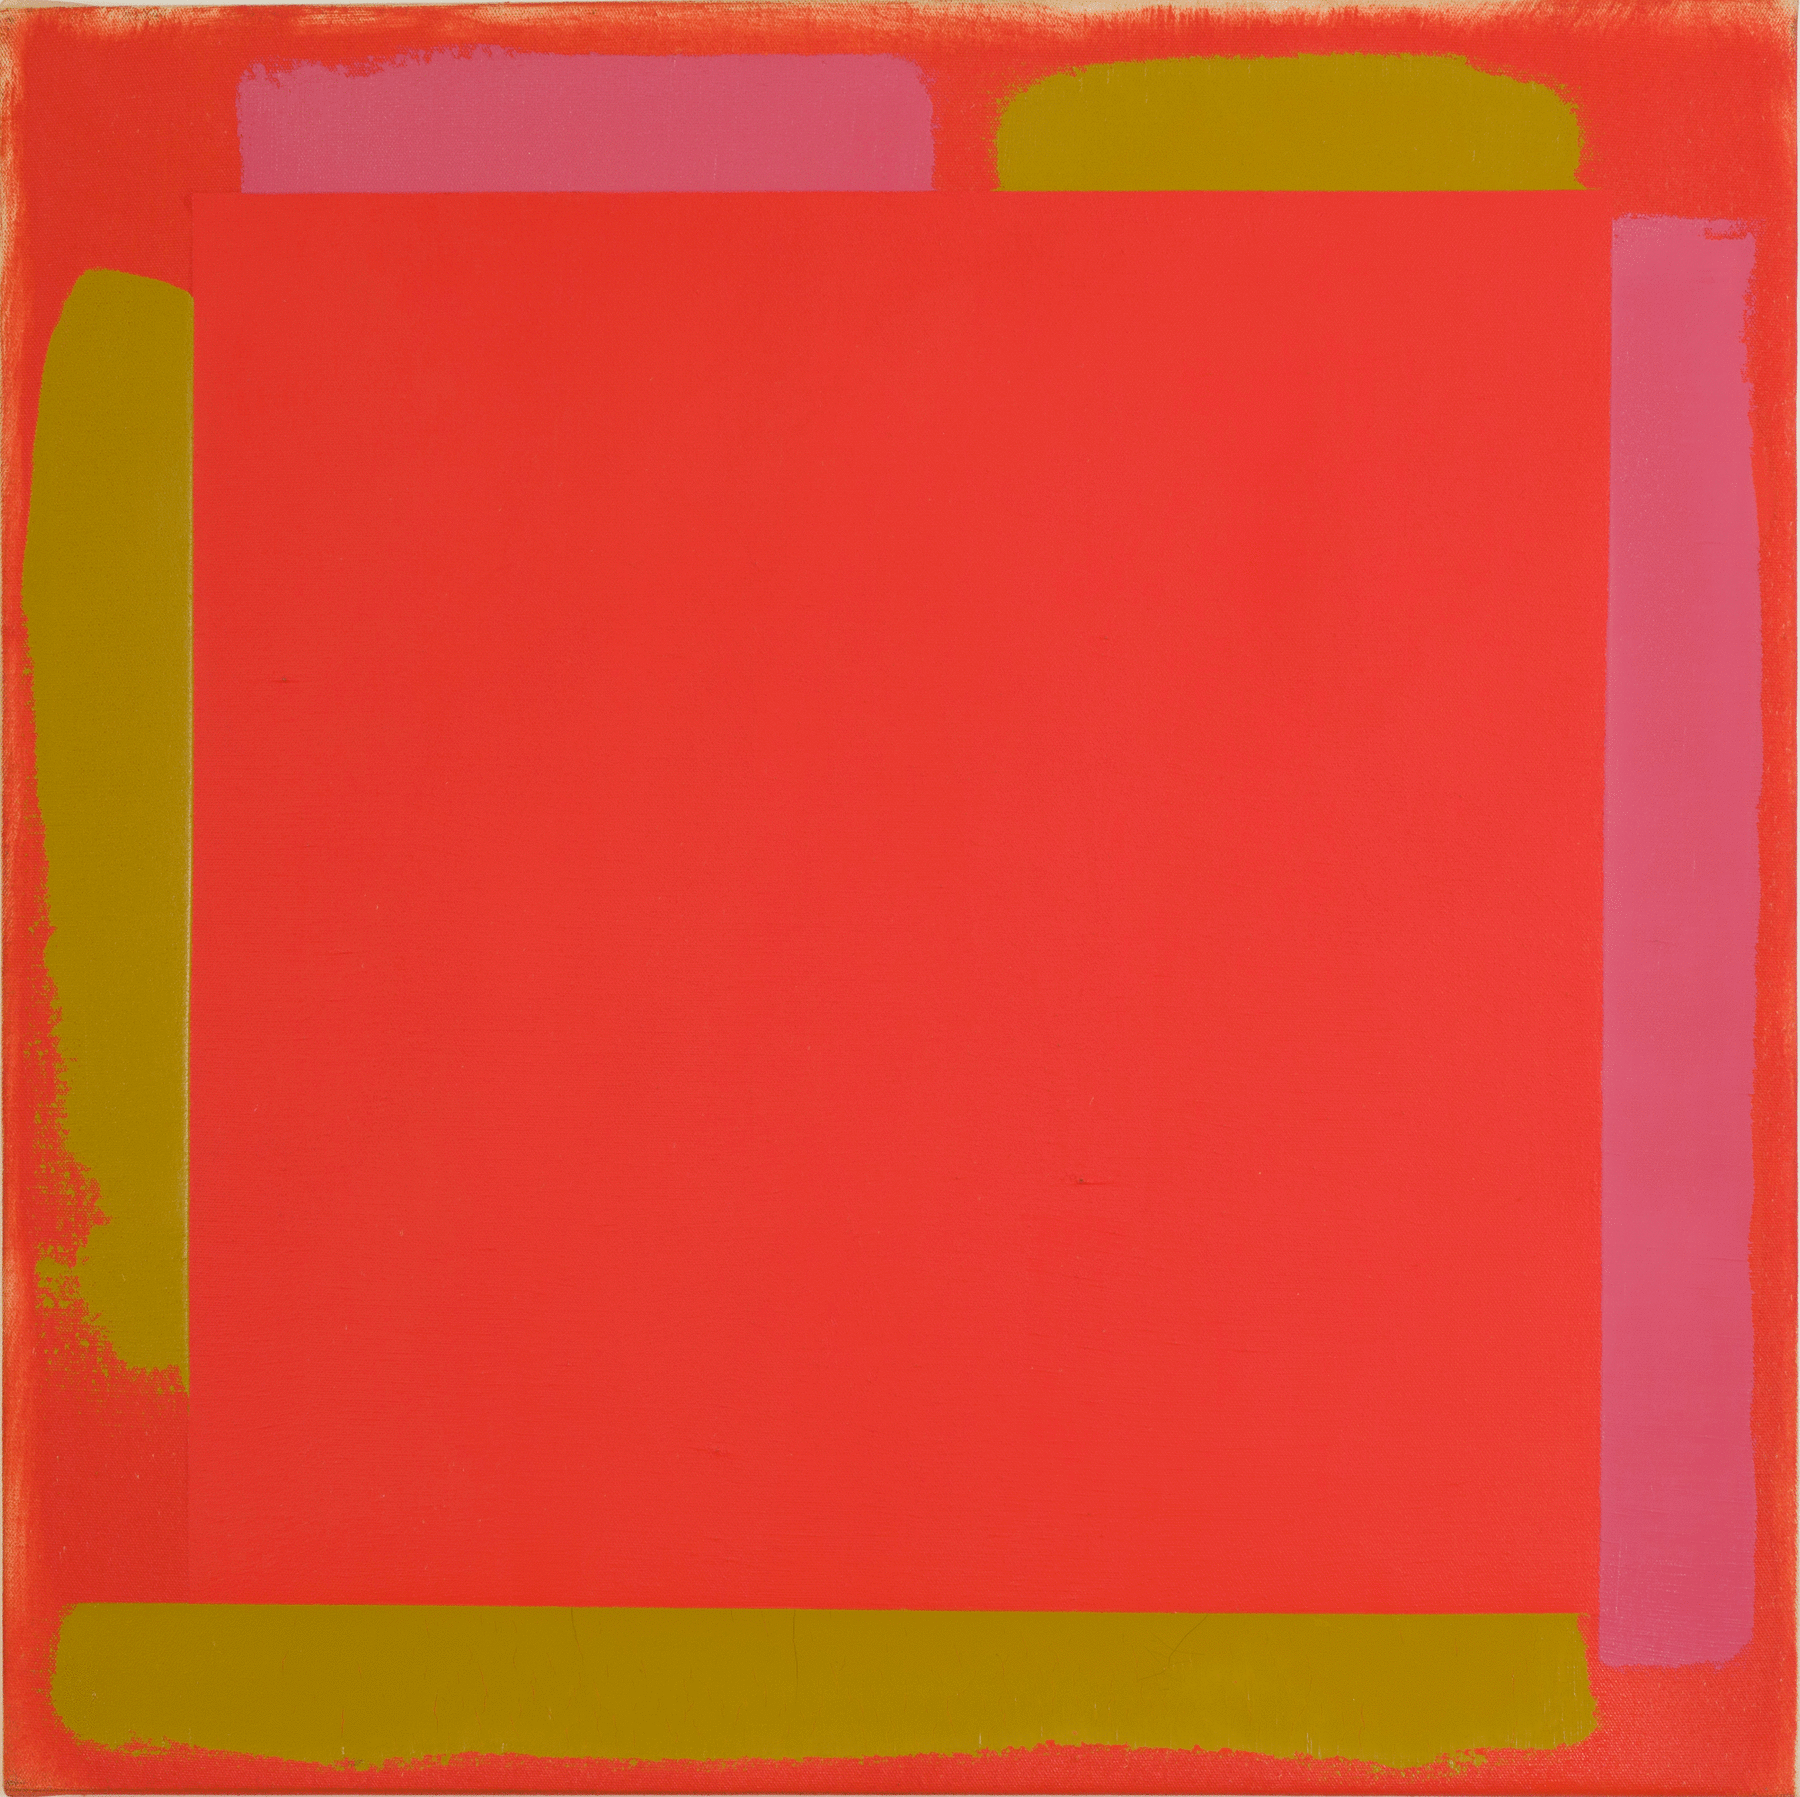 Painting by Doug Ohlson with yellow  and pink brushed lines of color along the edge of the square canvas over a red ground.